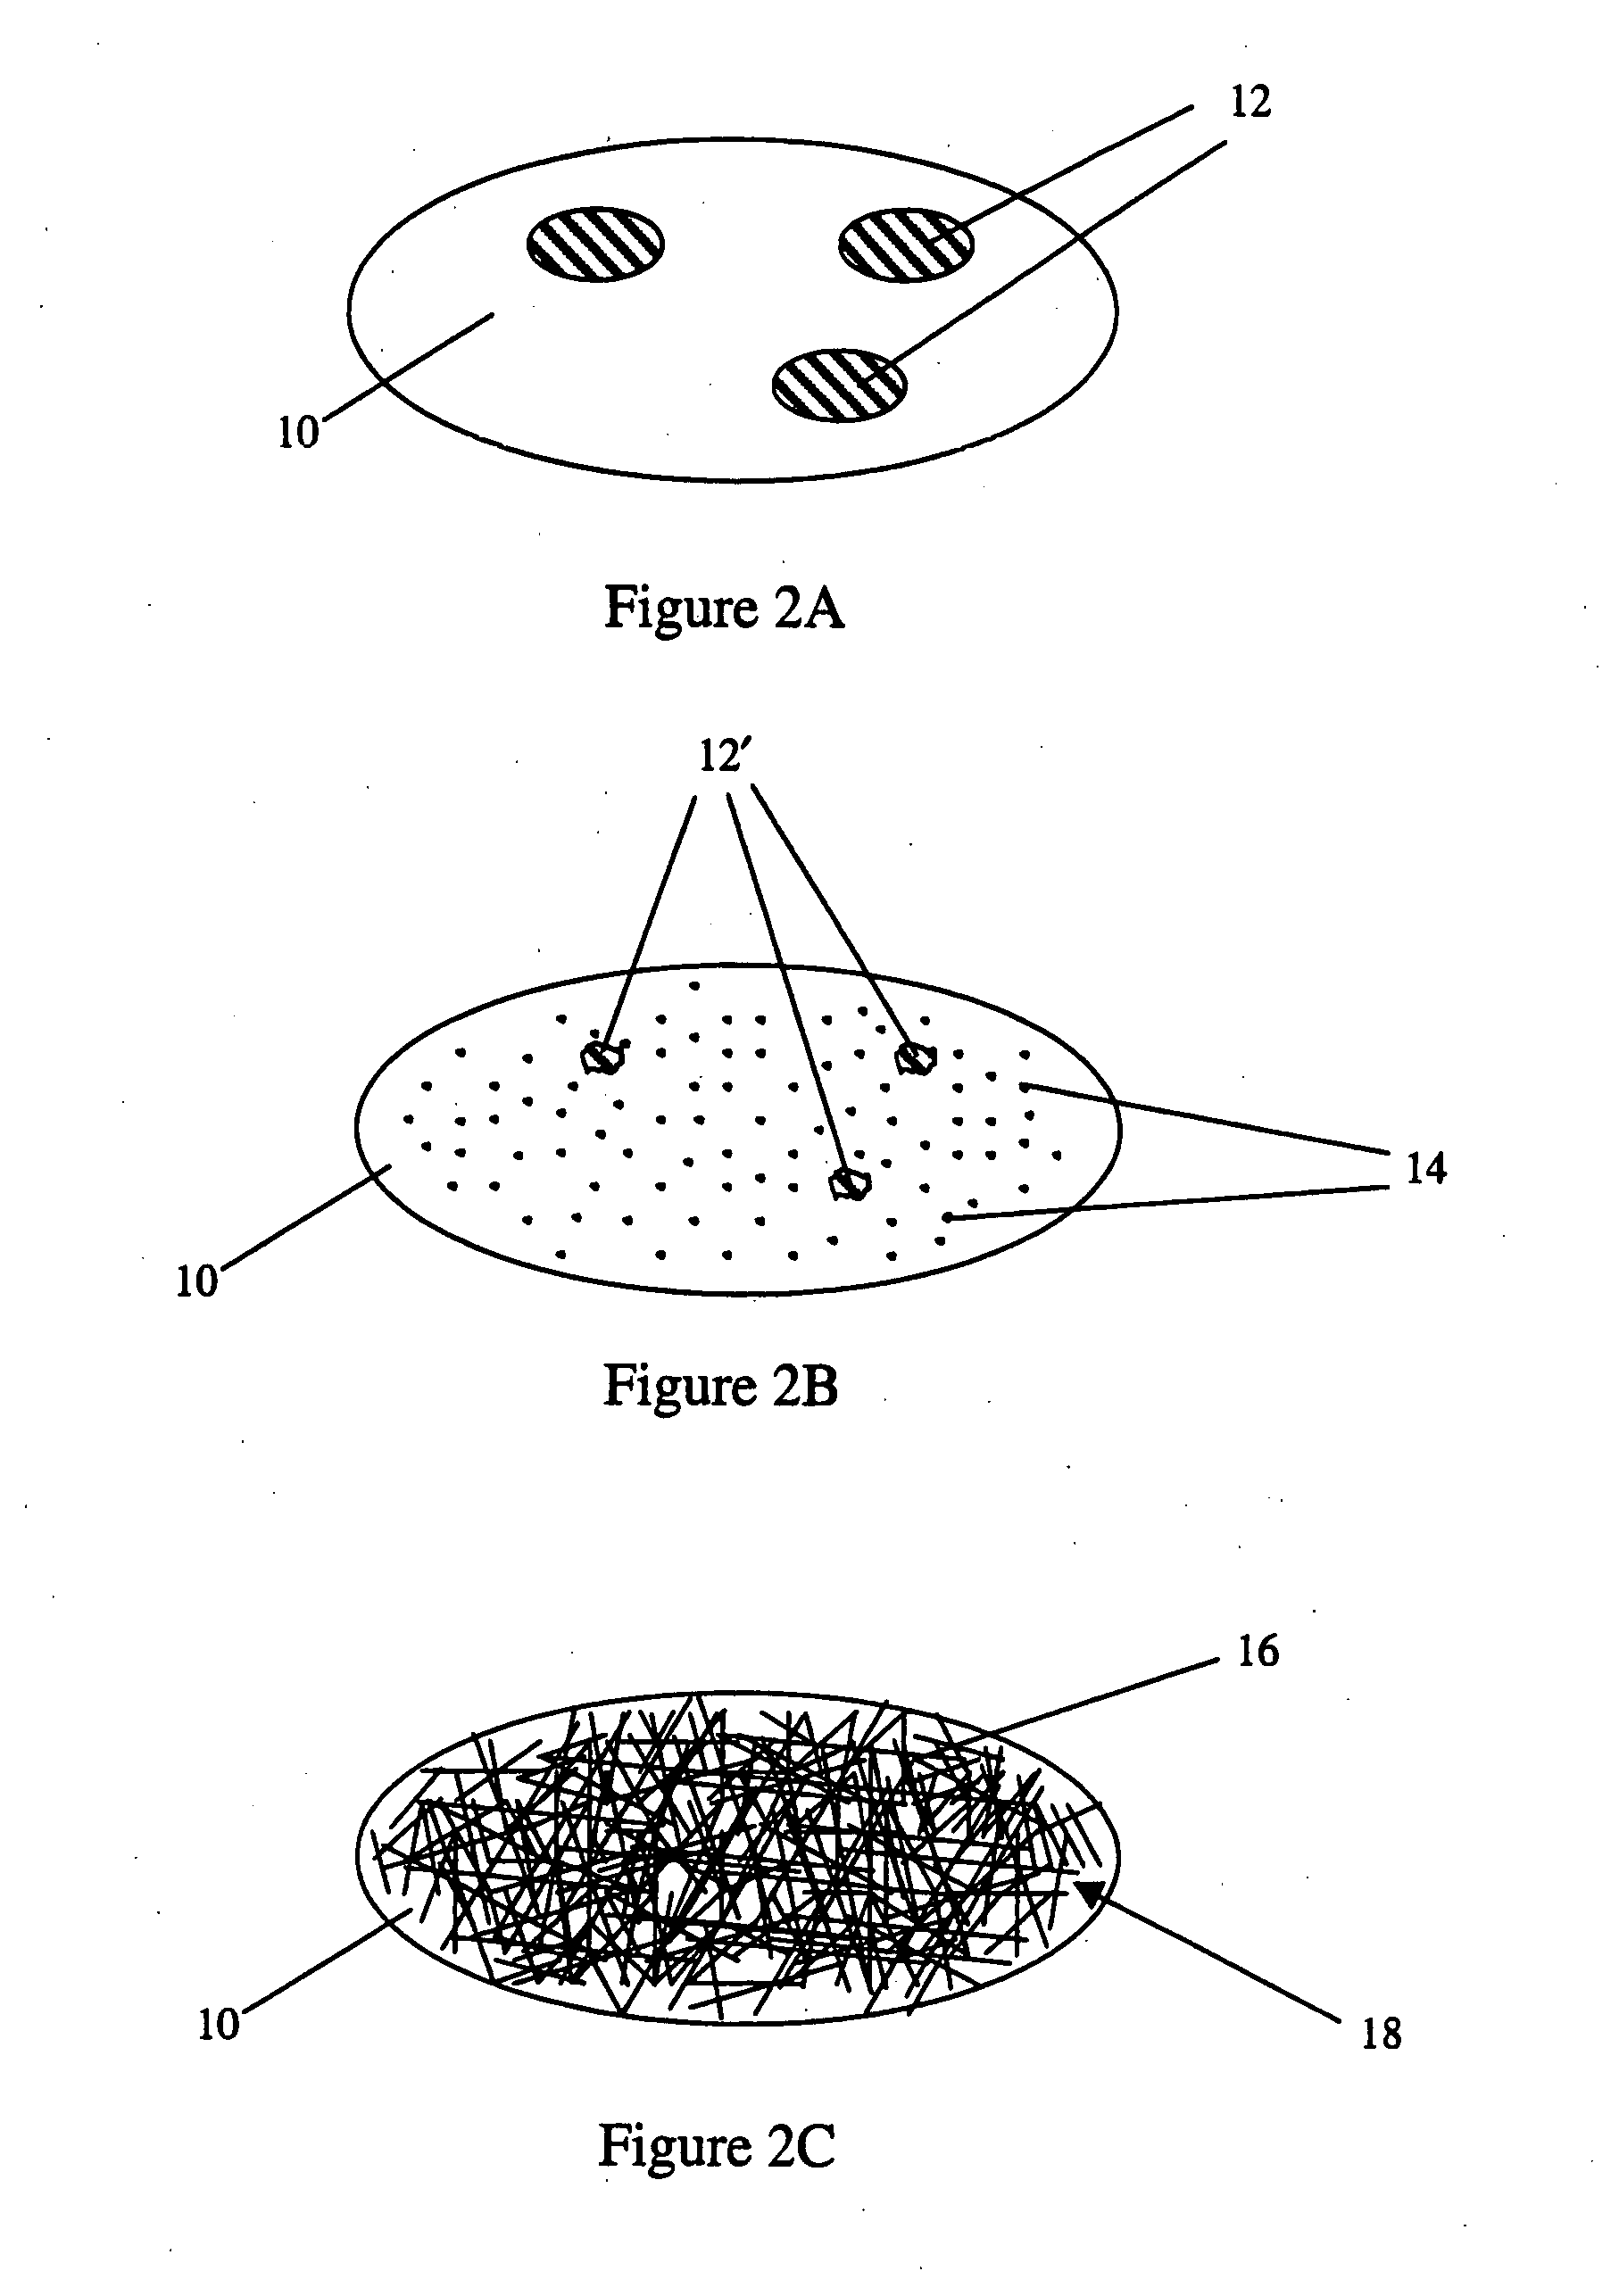 Dispersed growth of nanotubes on a substrate